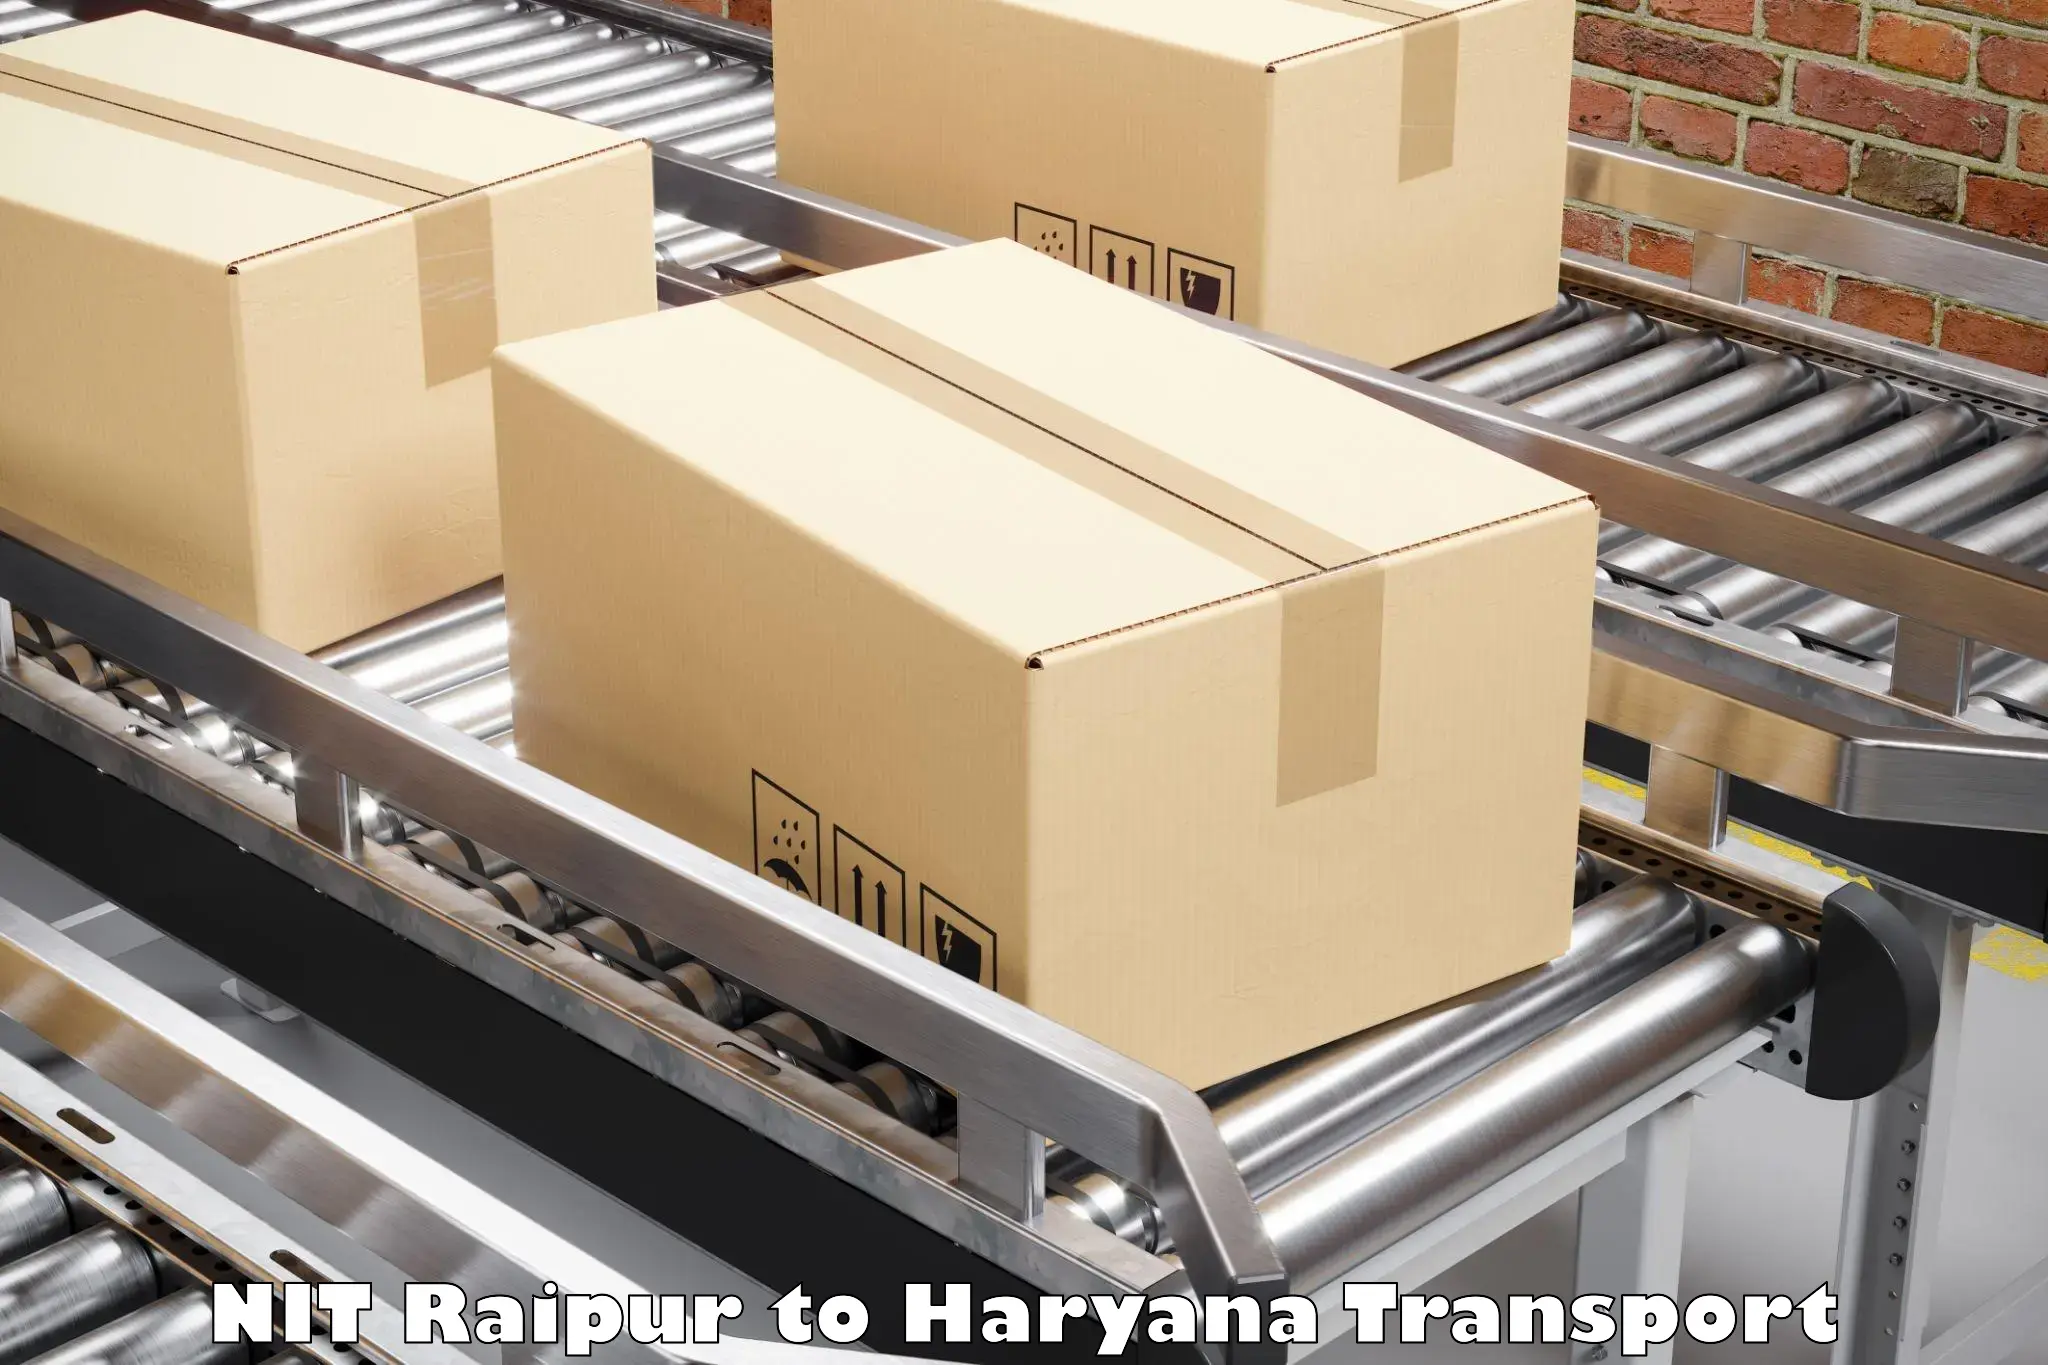 Vehicle transport services in NIT Raipur to Faridabad